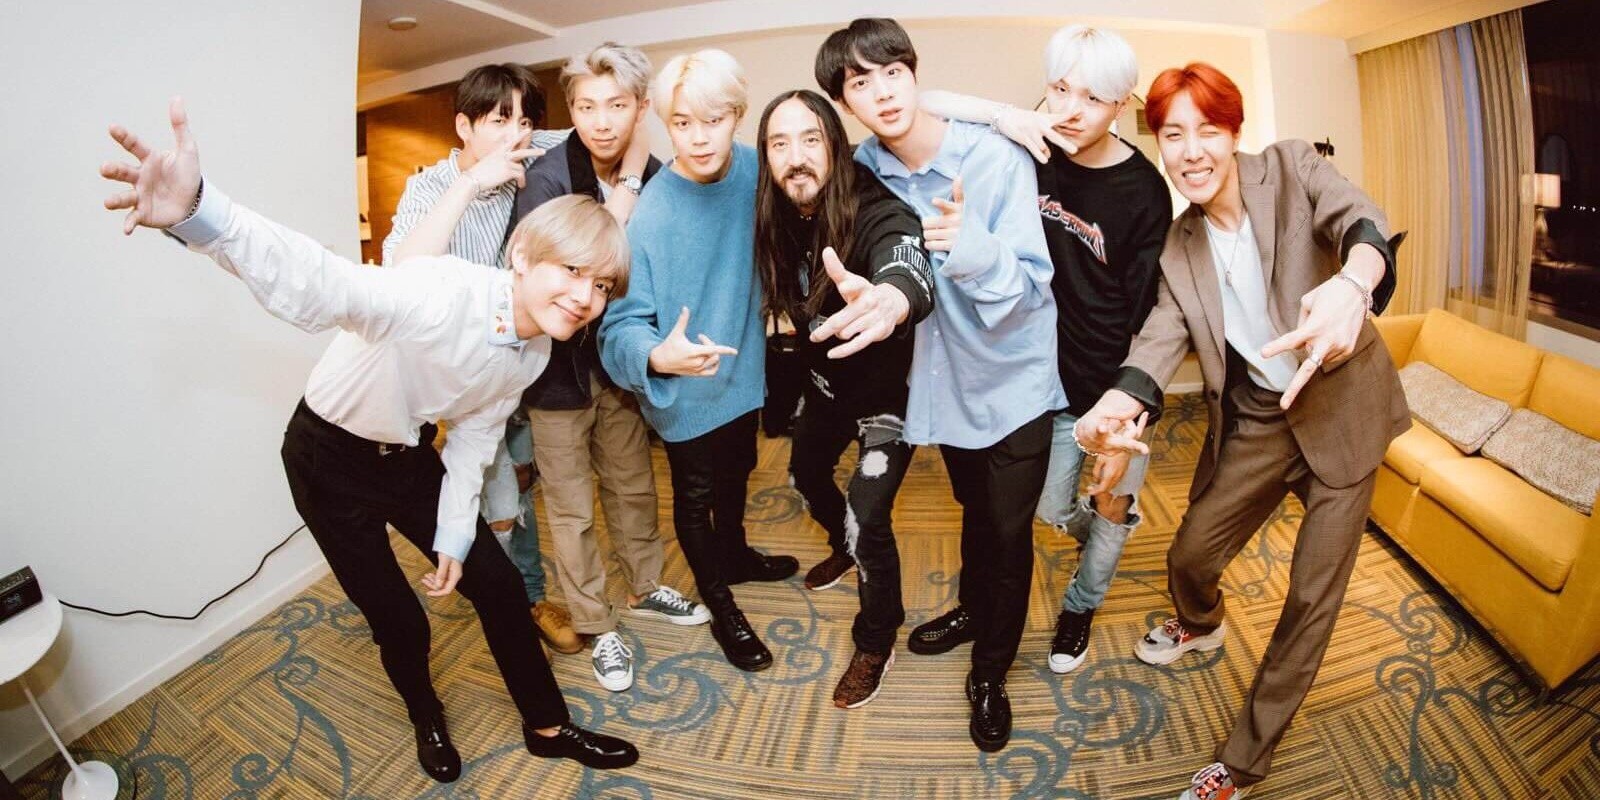 Steve Aoki thanks BTS and fans with Celebration Megamix for 1 billion views of 'Mic Drop' remix on YouTube